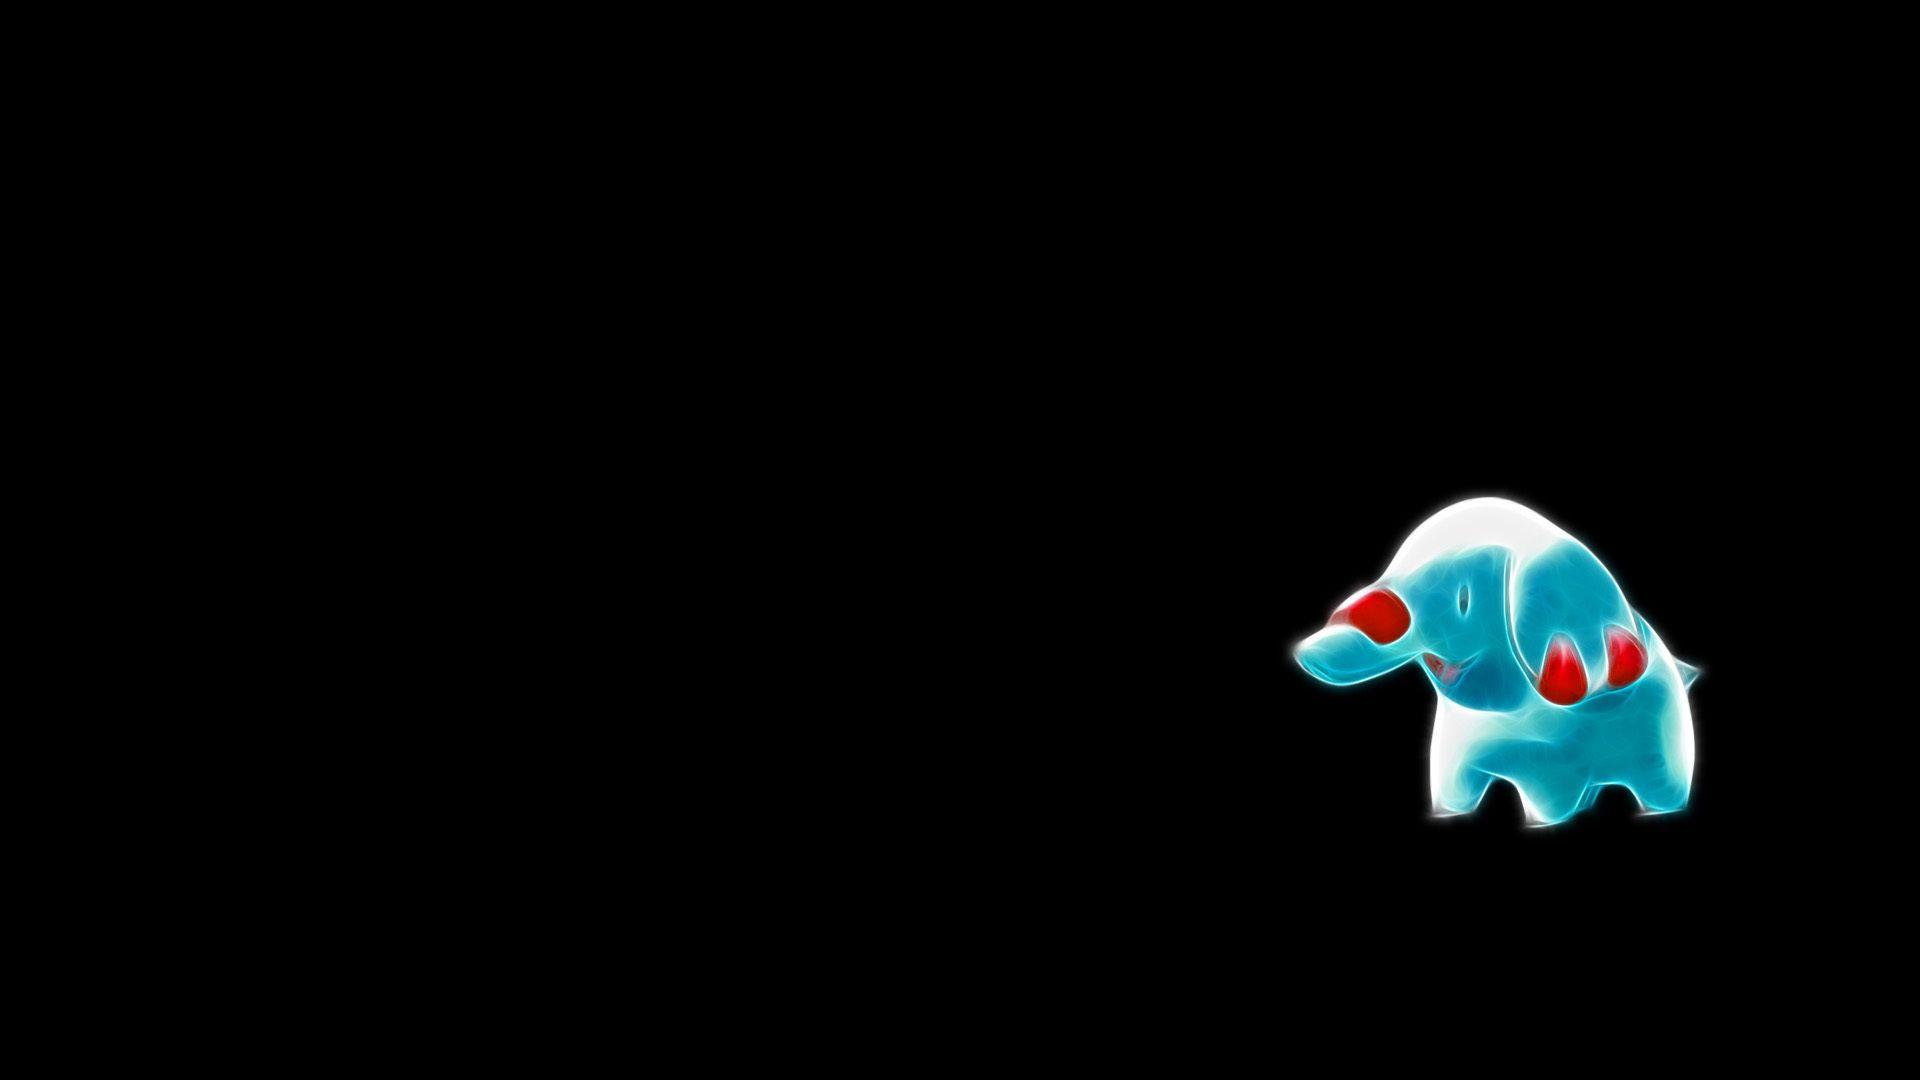 Phanpy Wallpaper Image Photo Picture Background